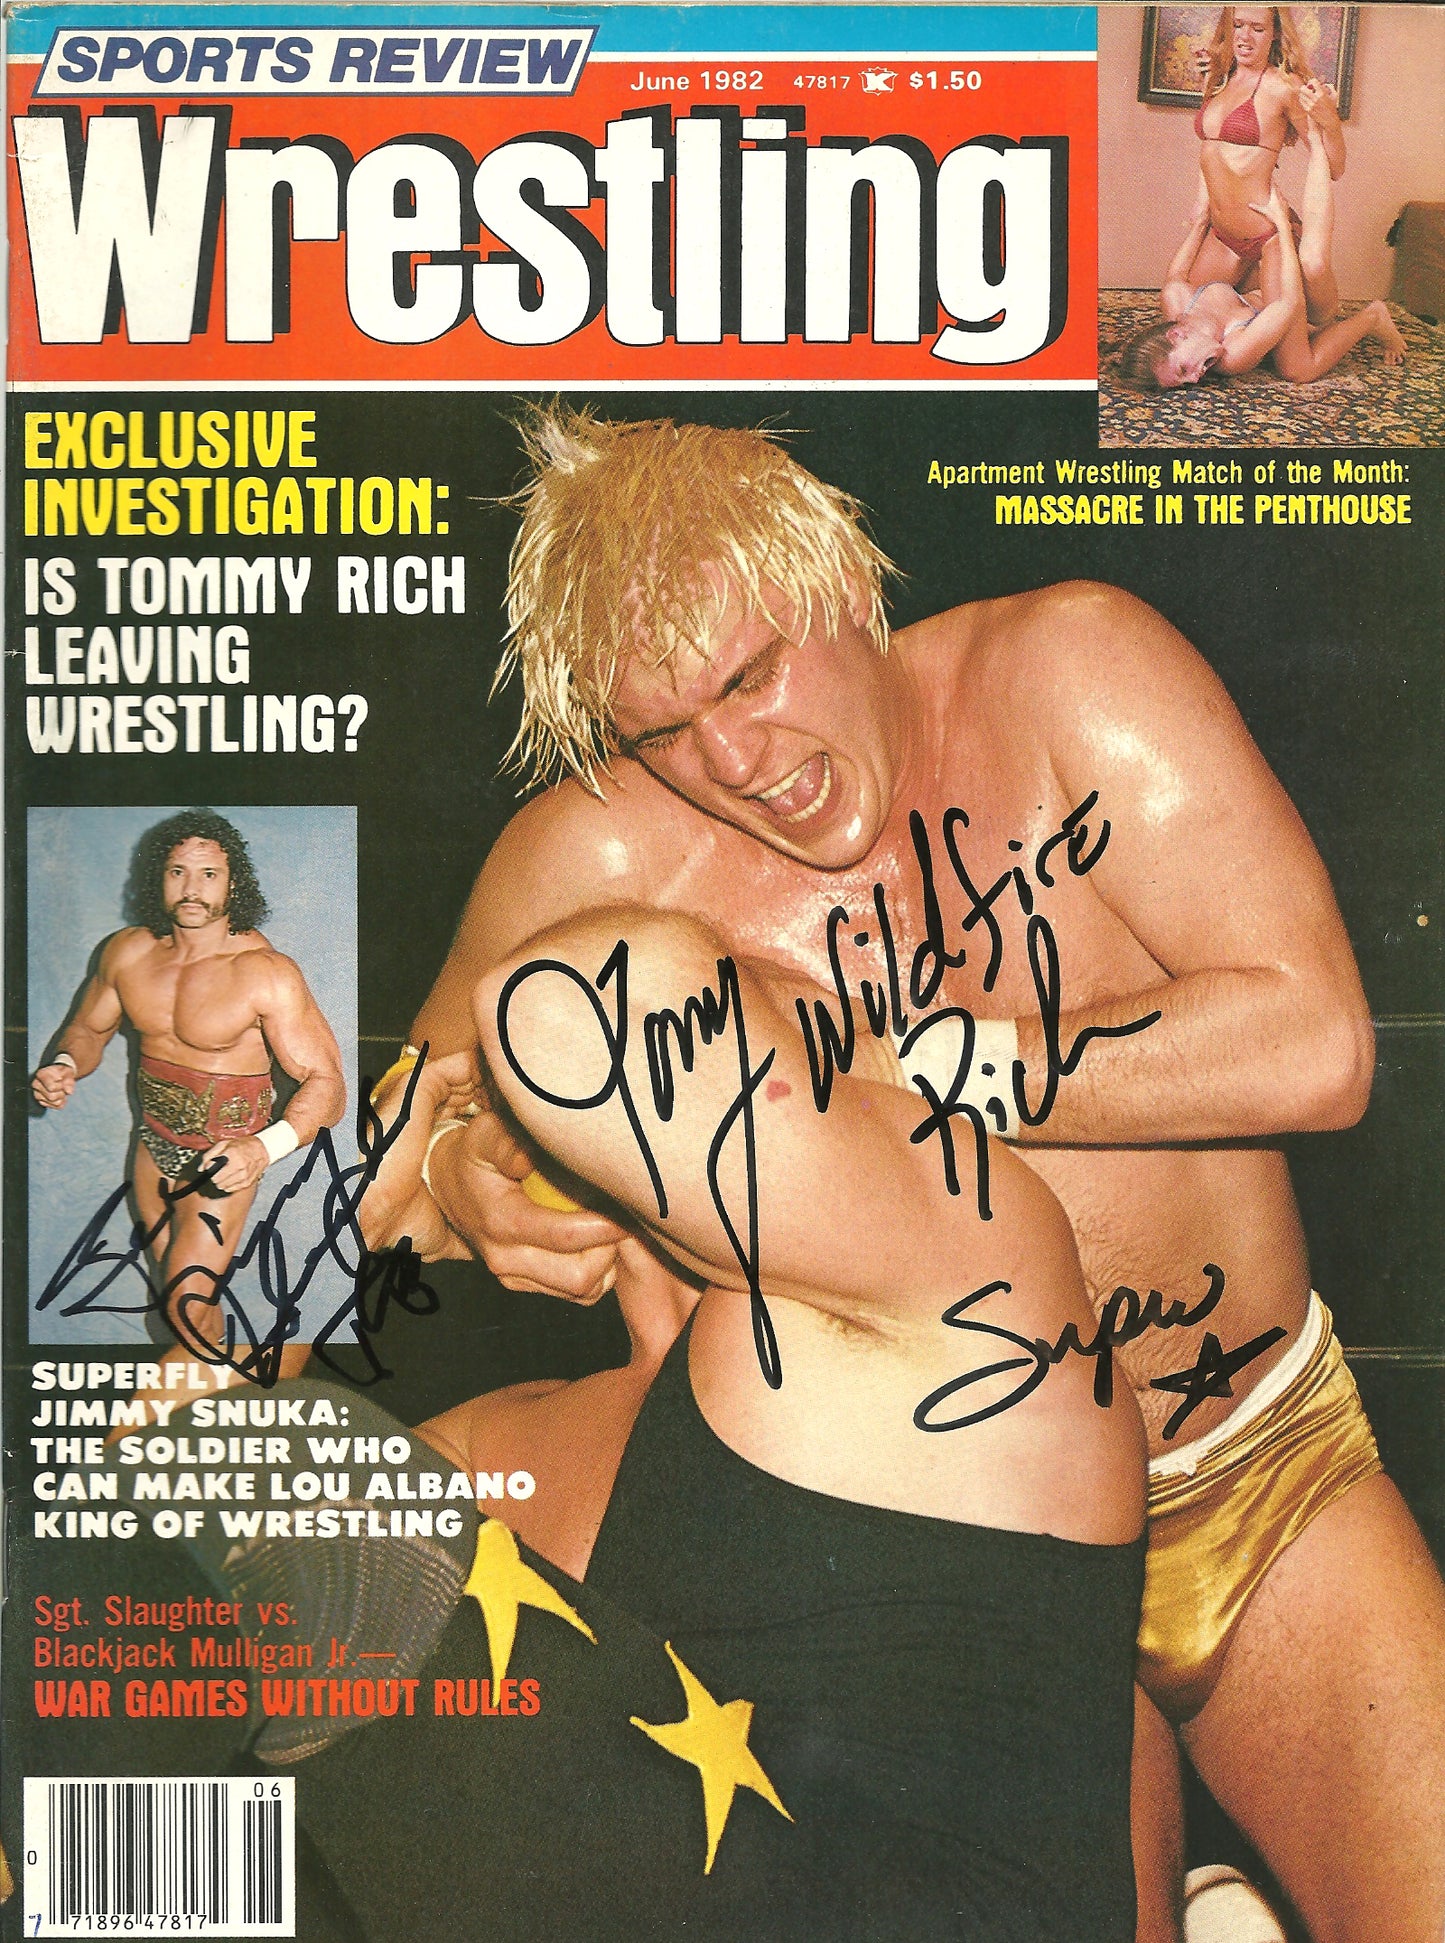 AM816  Superfly Jimmy Snuka ( Deceased ) Wildfire Tommy Rich Masked Superstar VERY RARE Autographed Vintage   Wrestling Magazine w/COA